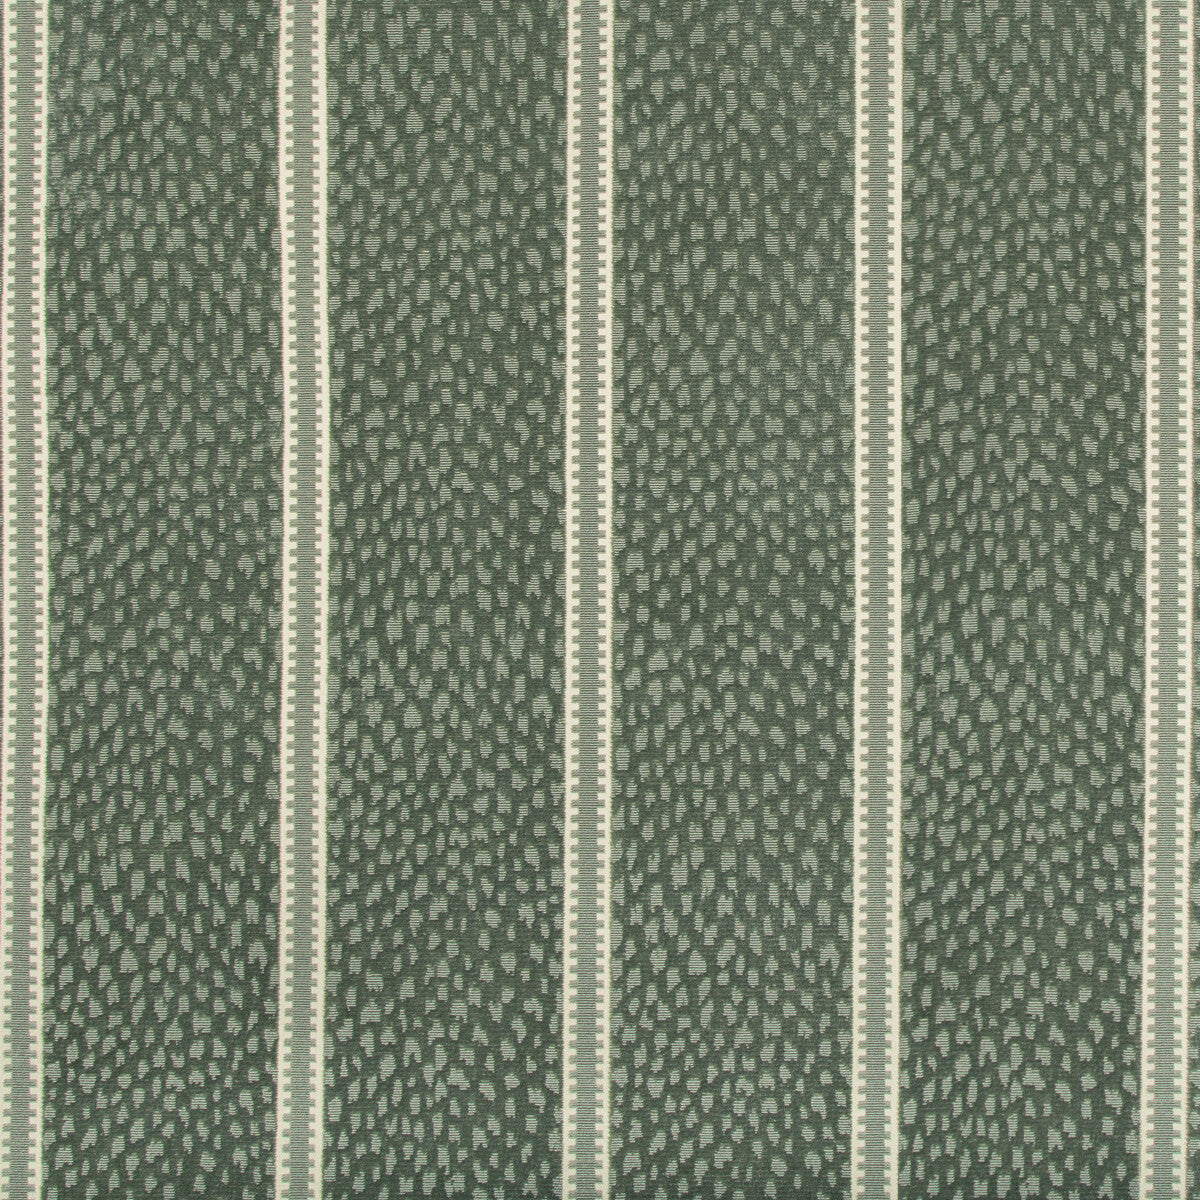 Salvator Velvet fabric in mist color - pattern 8019108.113.0 - by Brunschwig &amp; Fils in the Folio Francais collection